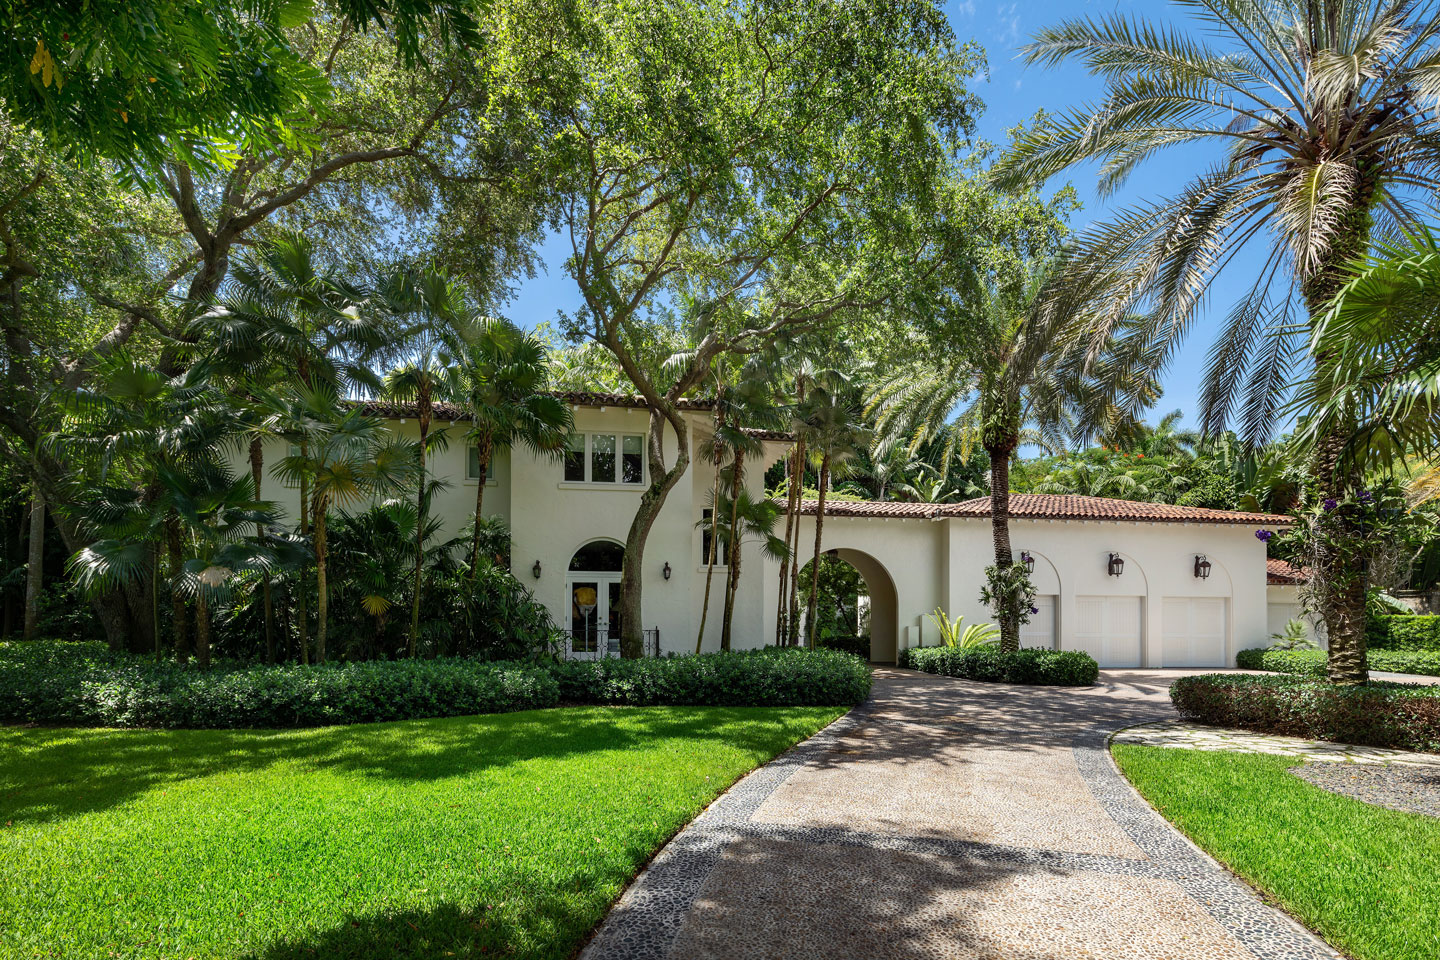 3725 Leafy Way, Coconut Grove, Miami, Florida, USA | Alley | Listed by Dennis Carvajal, Real Estate Agent, ONE Sotheby's International Realty | Finest Residences